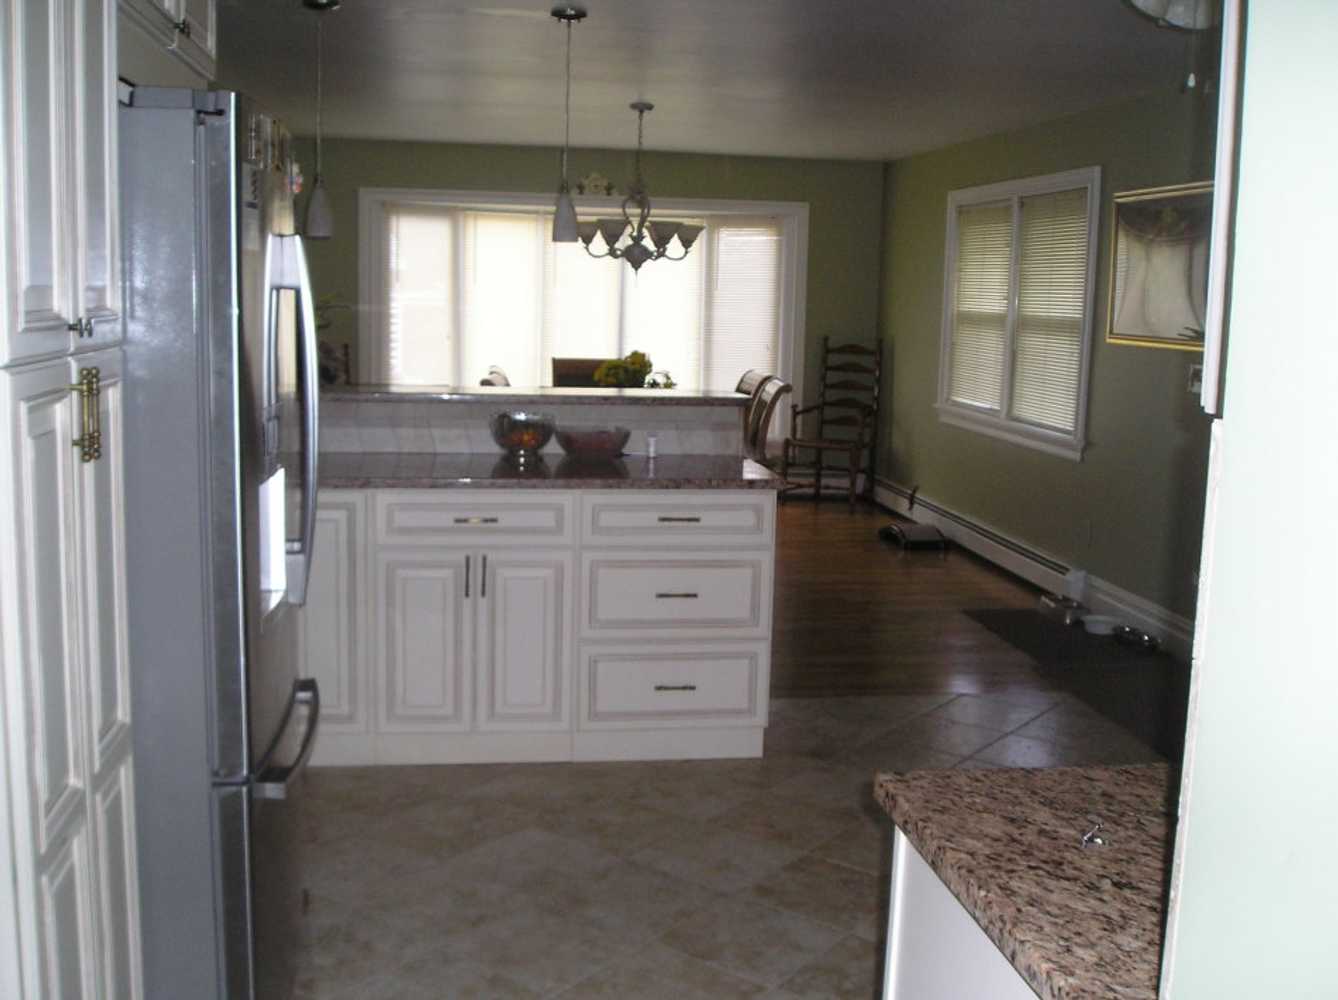 Kitchen,Family room,Dining room and Living Room Renovations